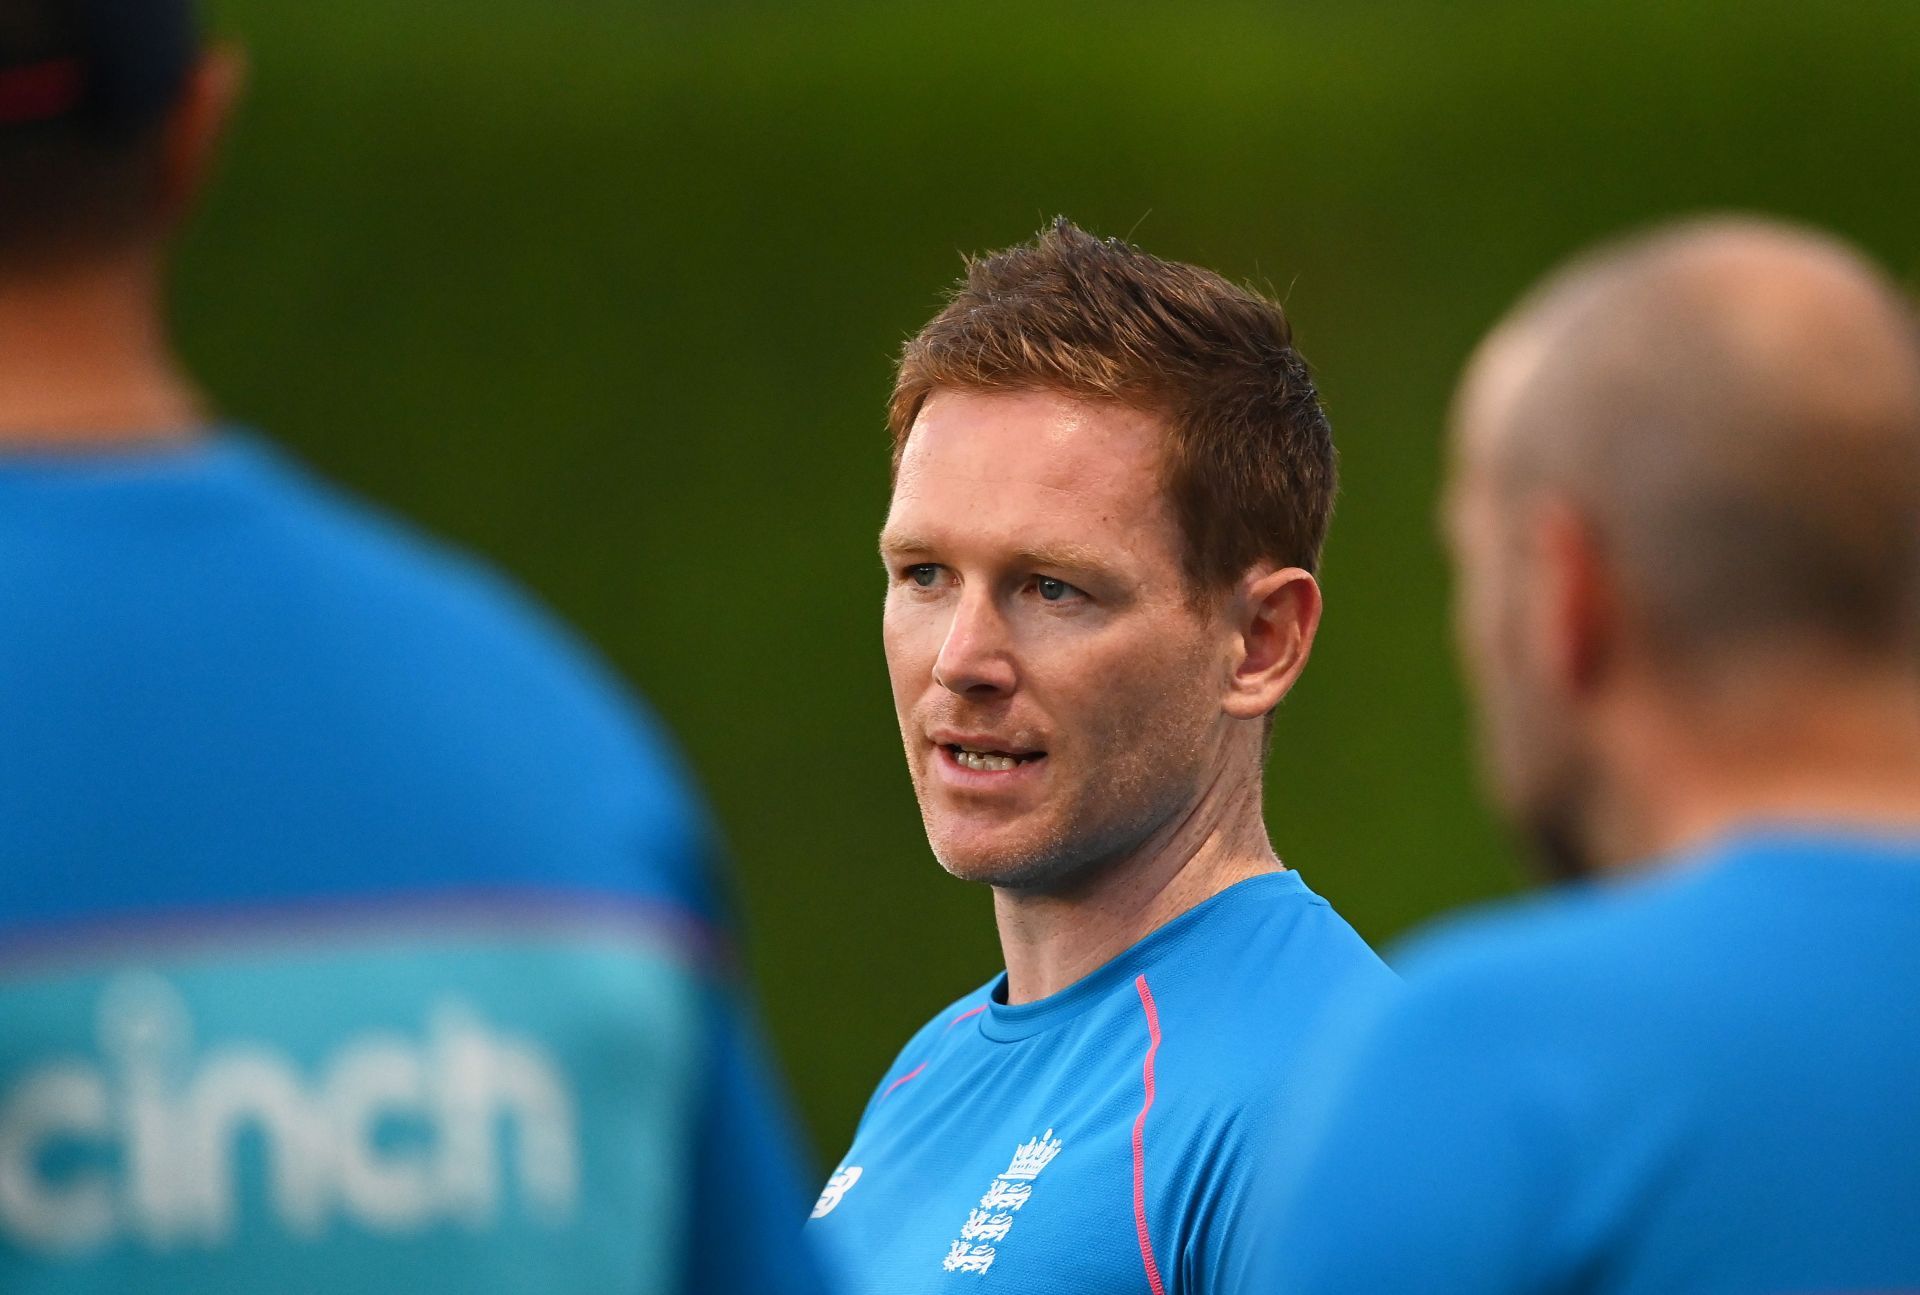 Eoin Morgan is on the lookout to complete the elusive World Cup double as a captain